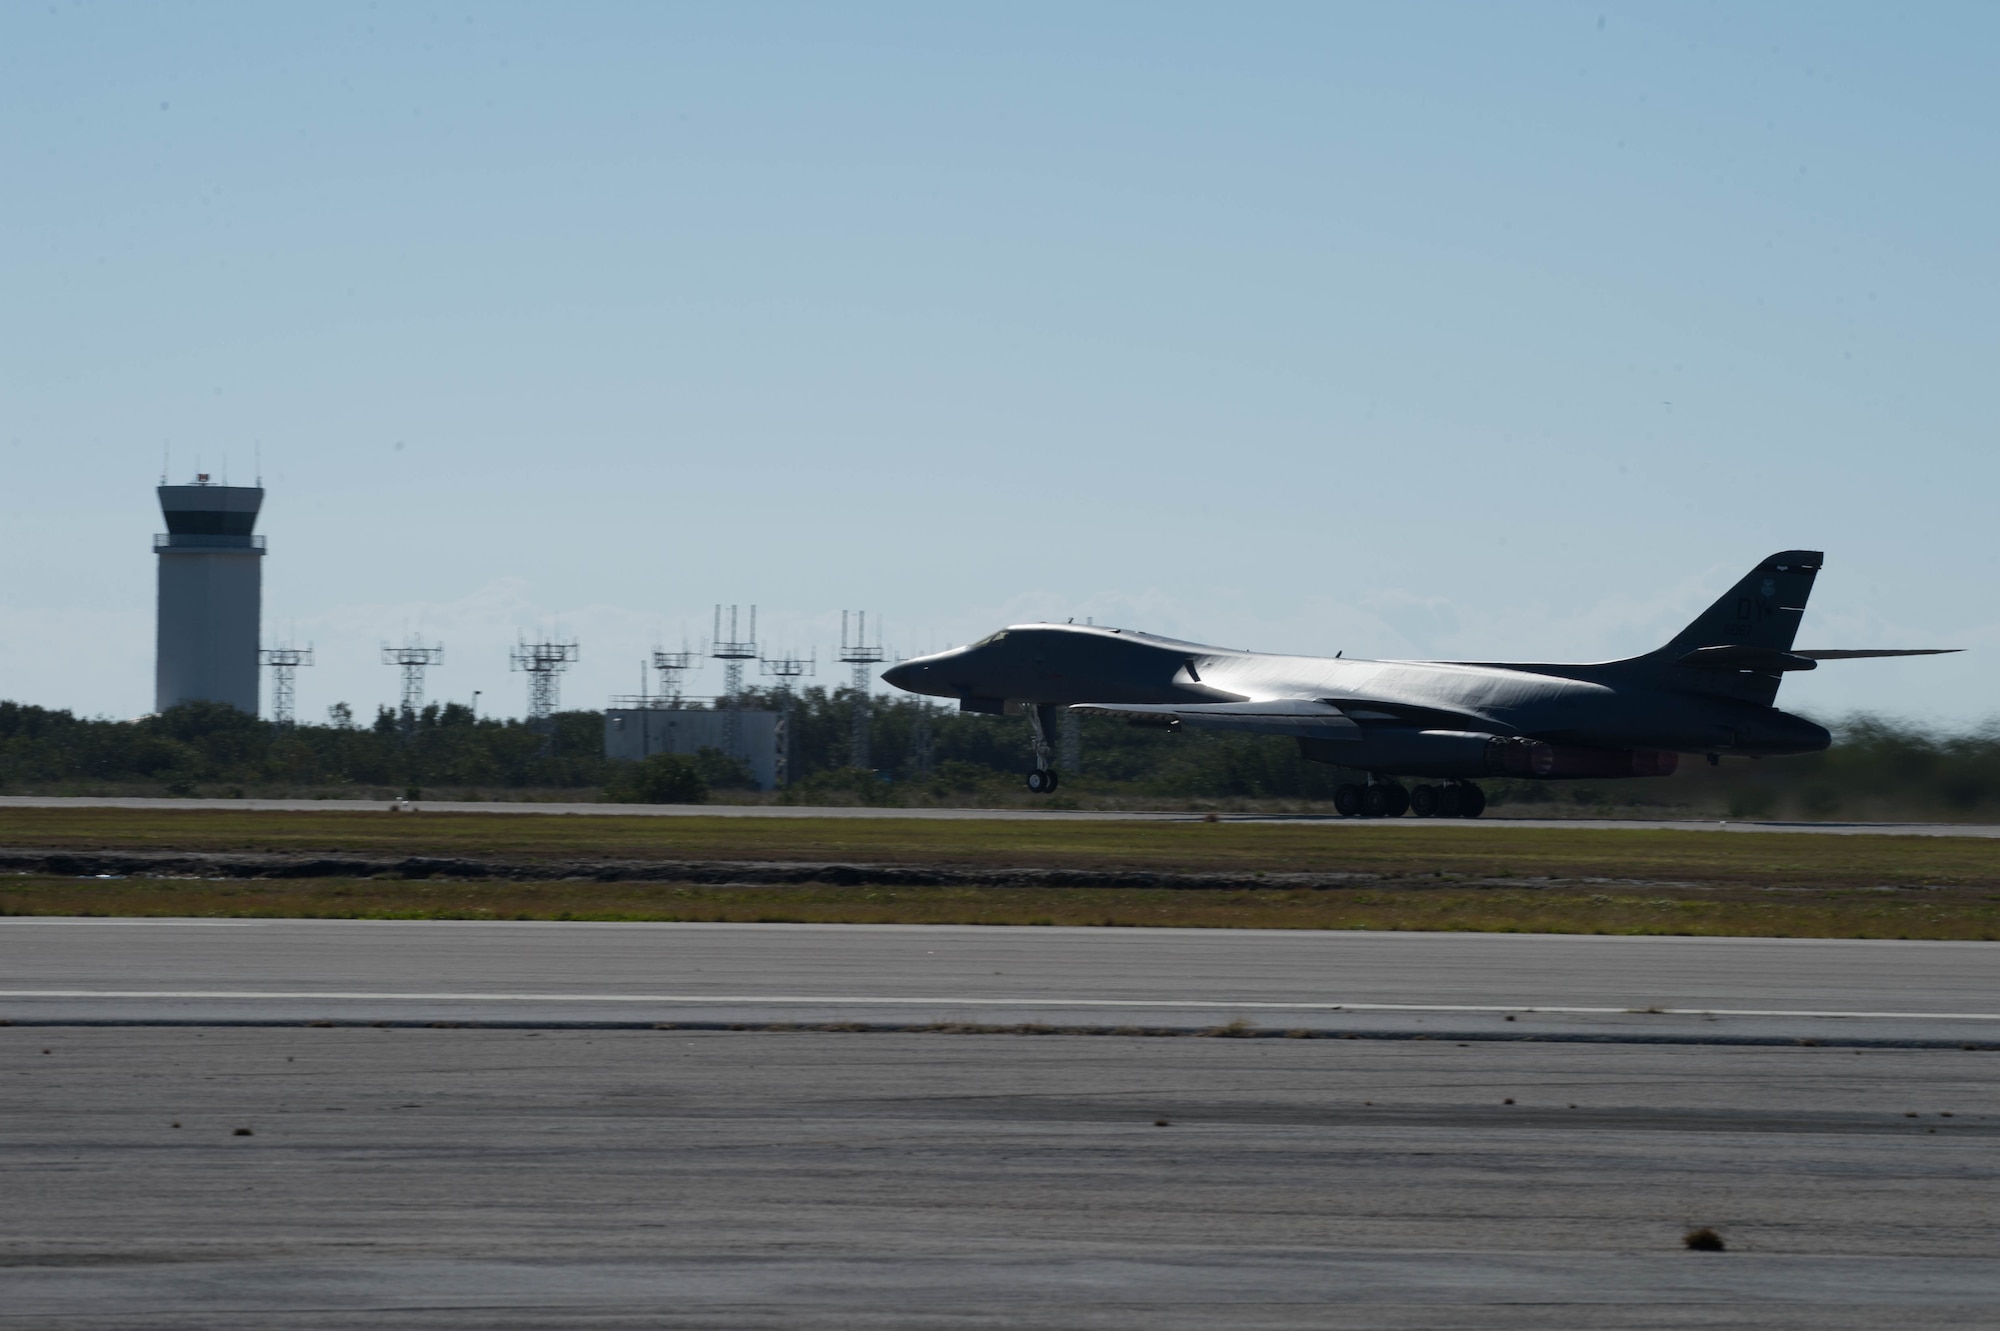 A B-1 Lancer takes-off from the Boca Chica Naval Air Station, Key West Fla., flightline to participate in the Joint Interagency Task Force South mission March 22, 2017. The JIATF-South’s mission of detection and monitoring of illicit trafficking from Latin America has confiscated more than $95.2 million of narcotics in 2016. (U.S. Air Force photo by Staff Sgt. Jason McCasland/released)